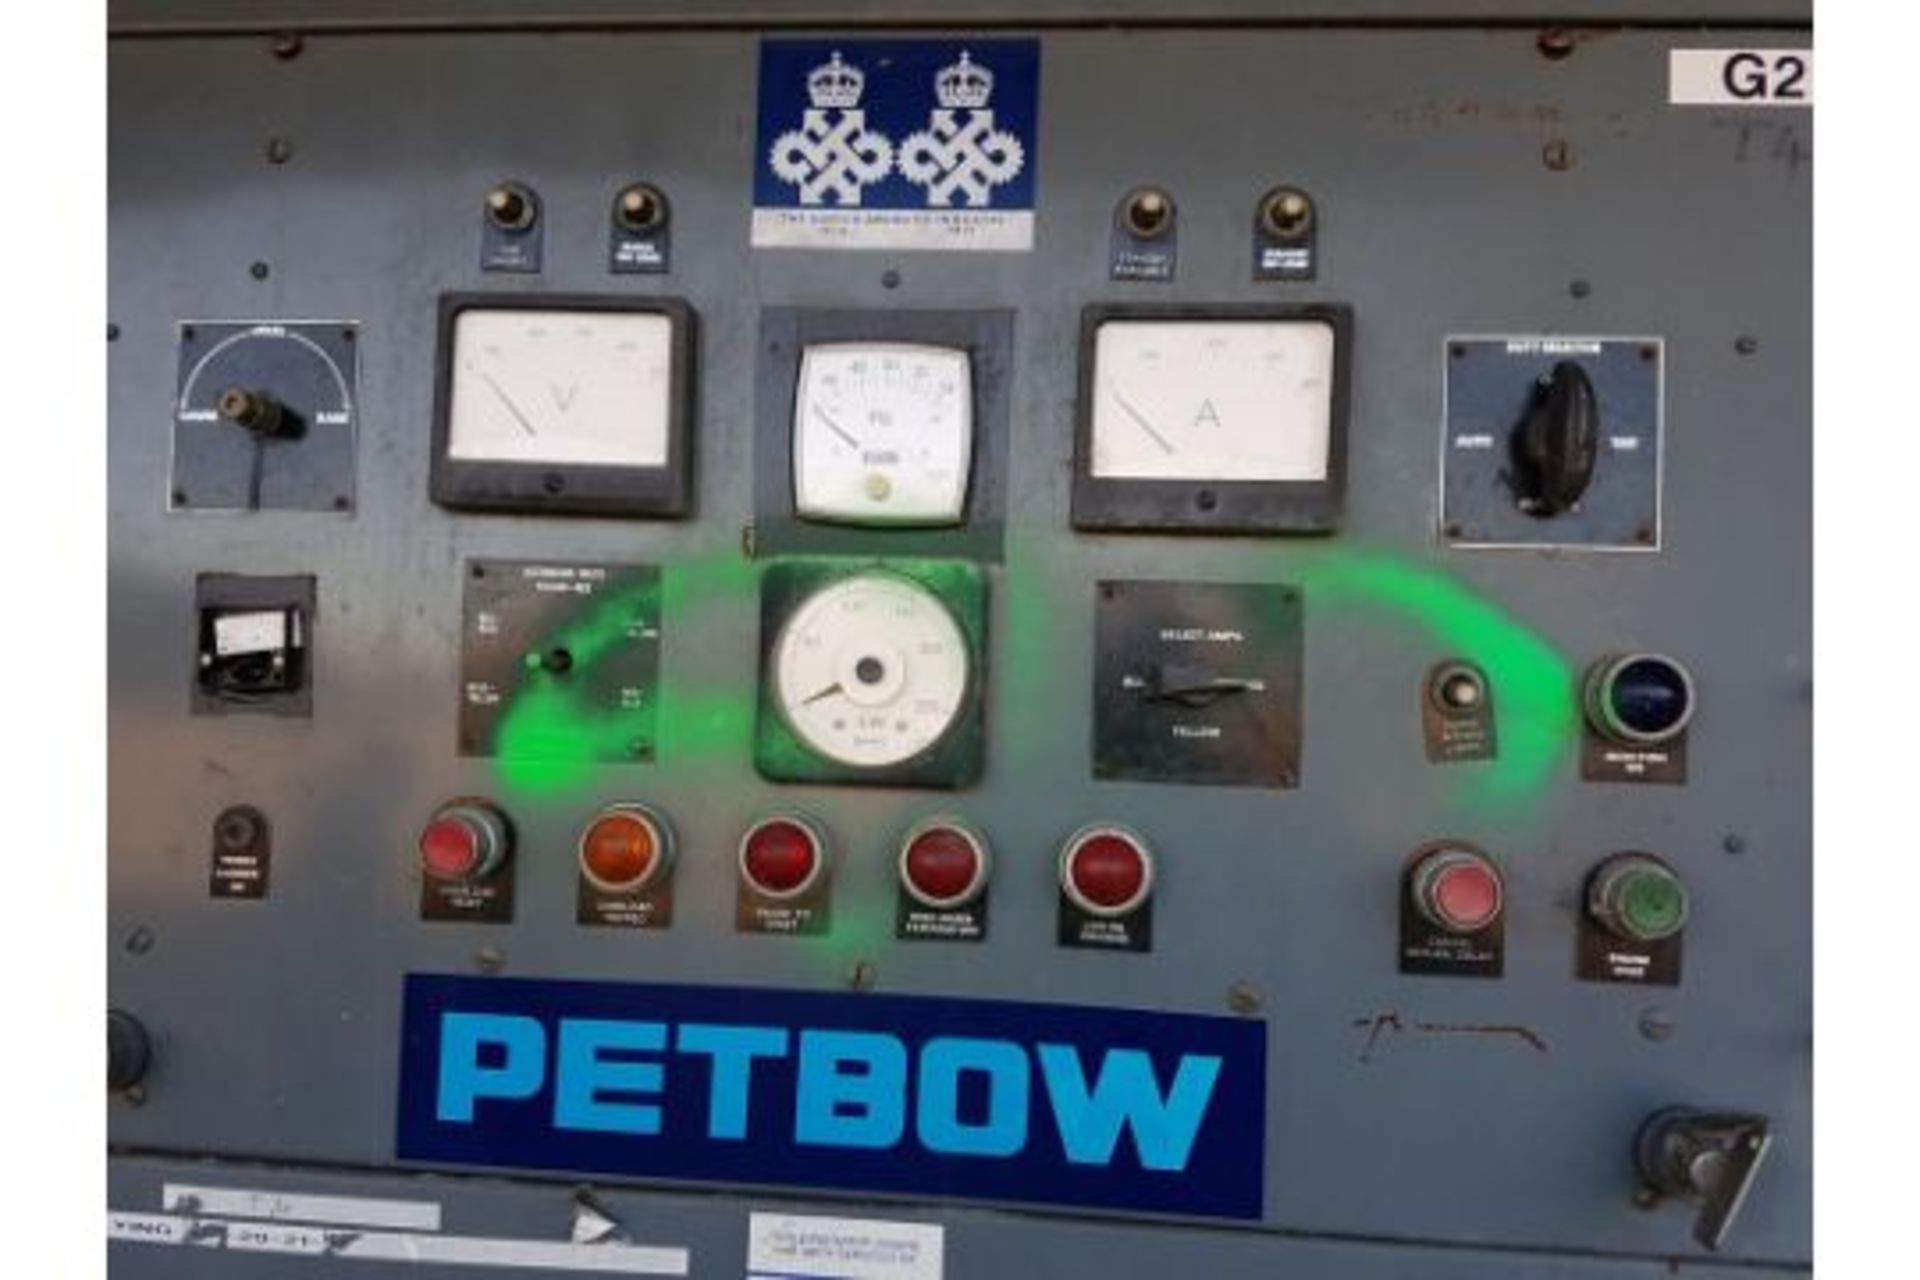 Large Petbow Generator Control Panel, Ex Standby - Image 2 of 2